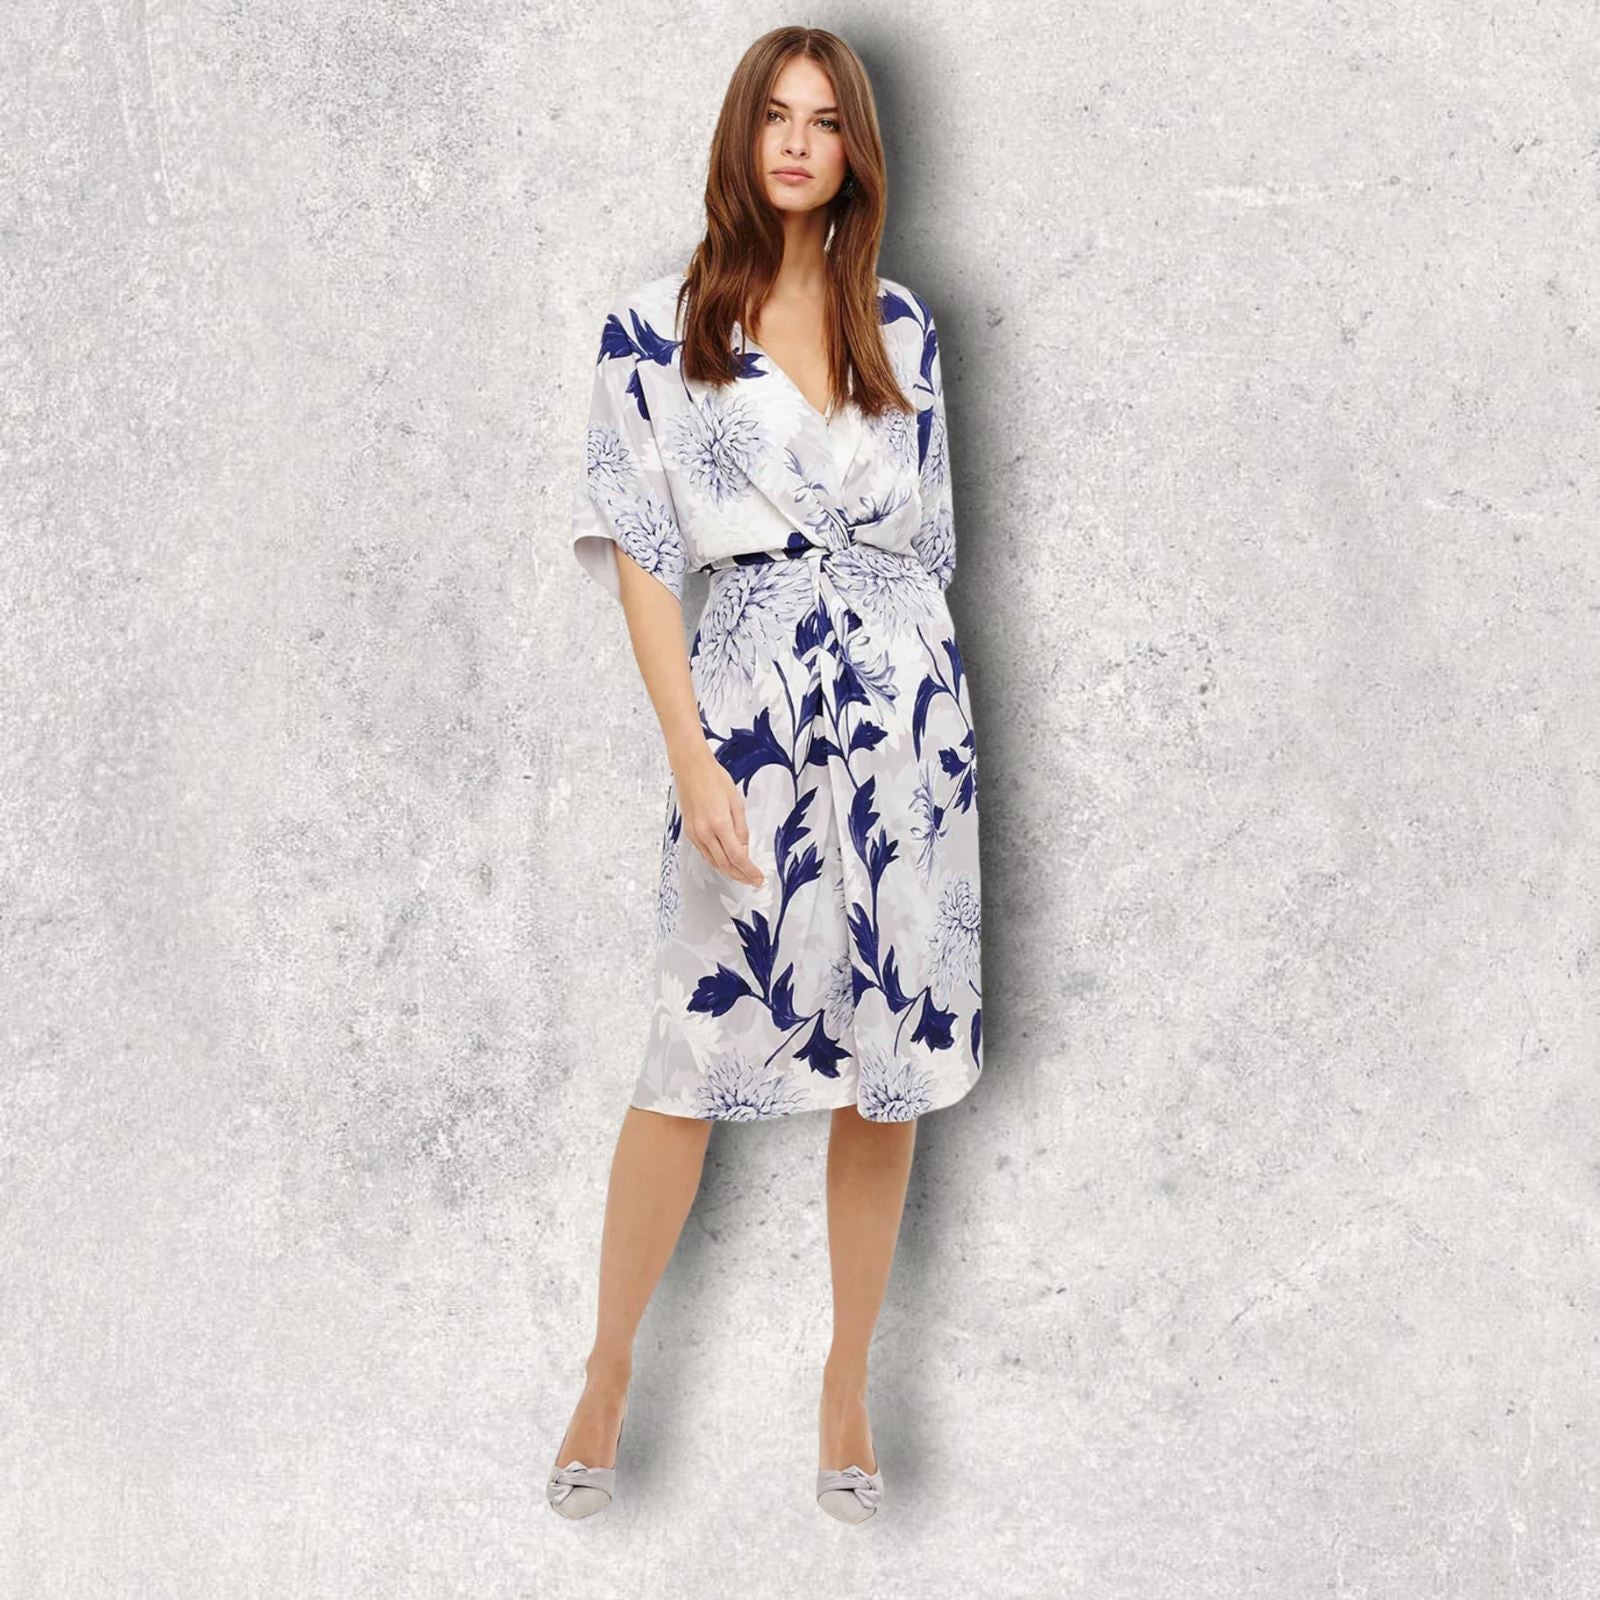 Phase Eight April Floral Front Twist Half Sleeve Navy & Grey Dress UK 14 US 10 EU 42 Timeless Fashions